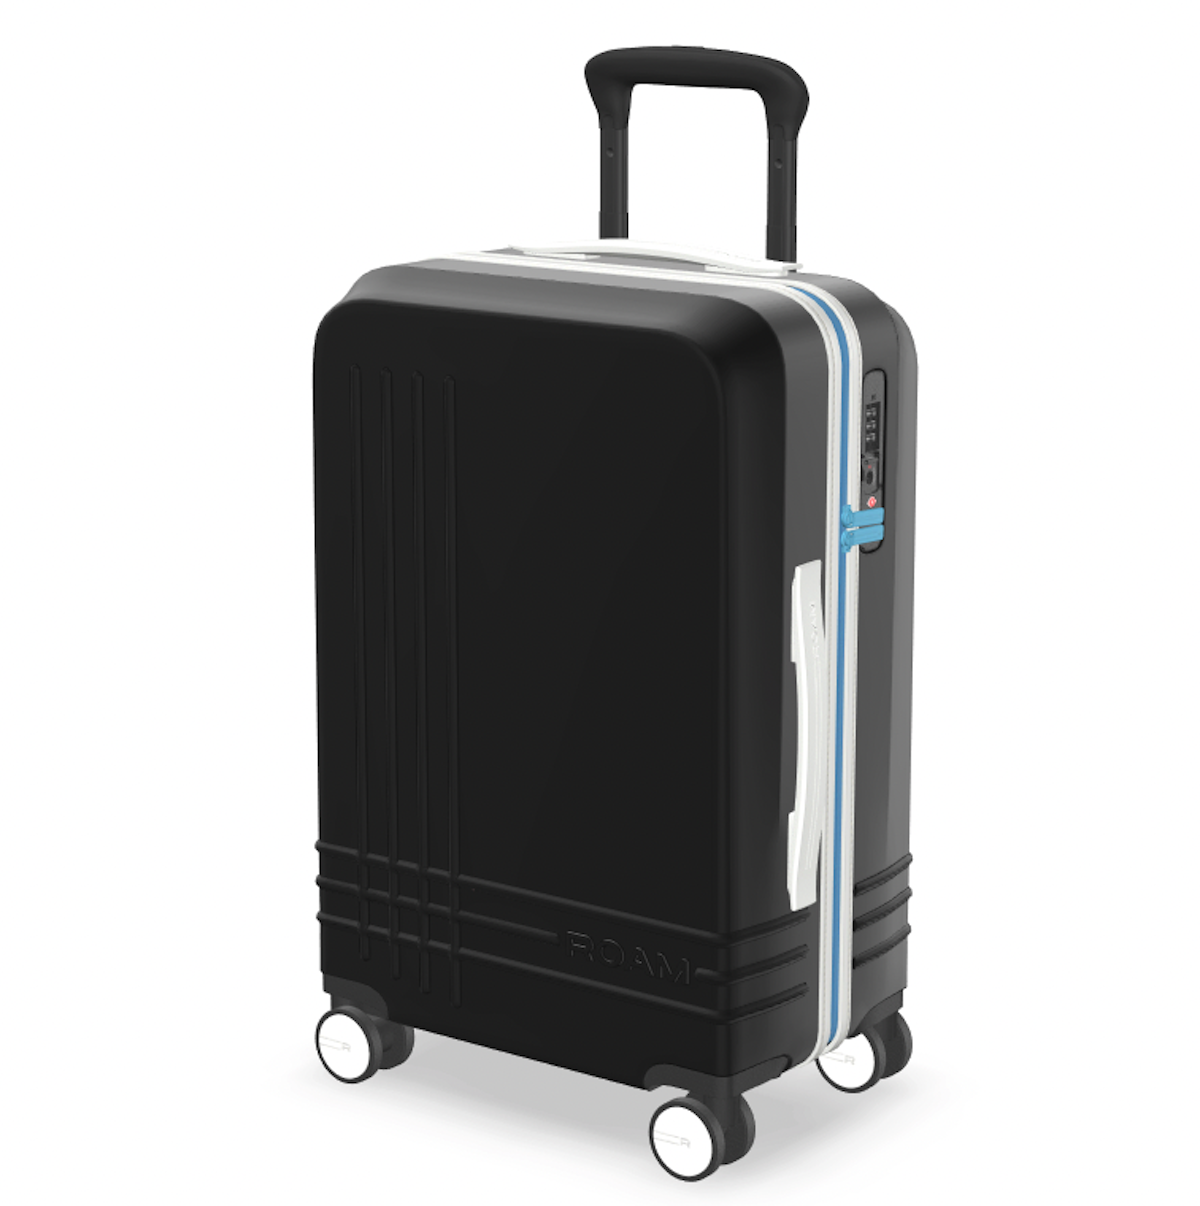 Perfect carry-on for wedding travel